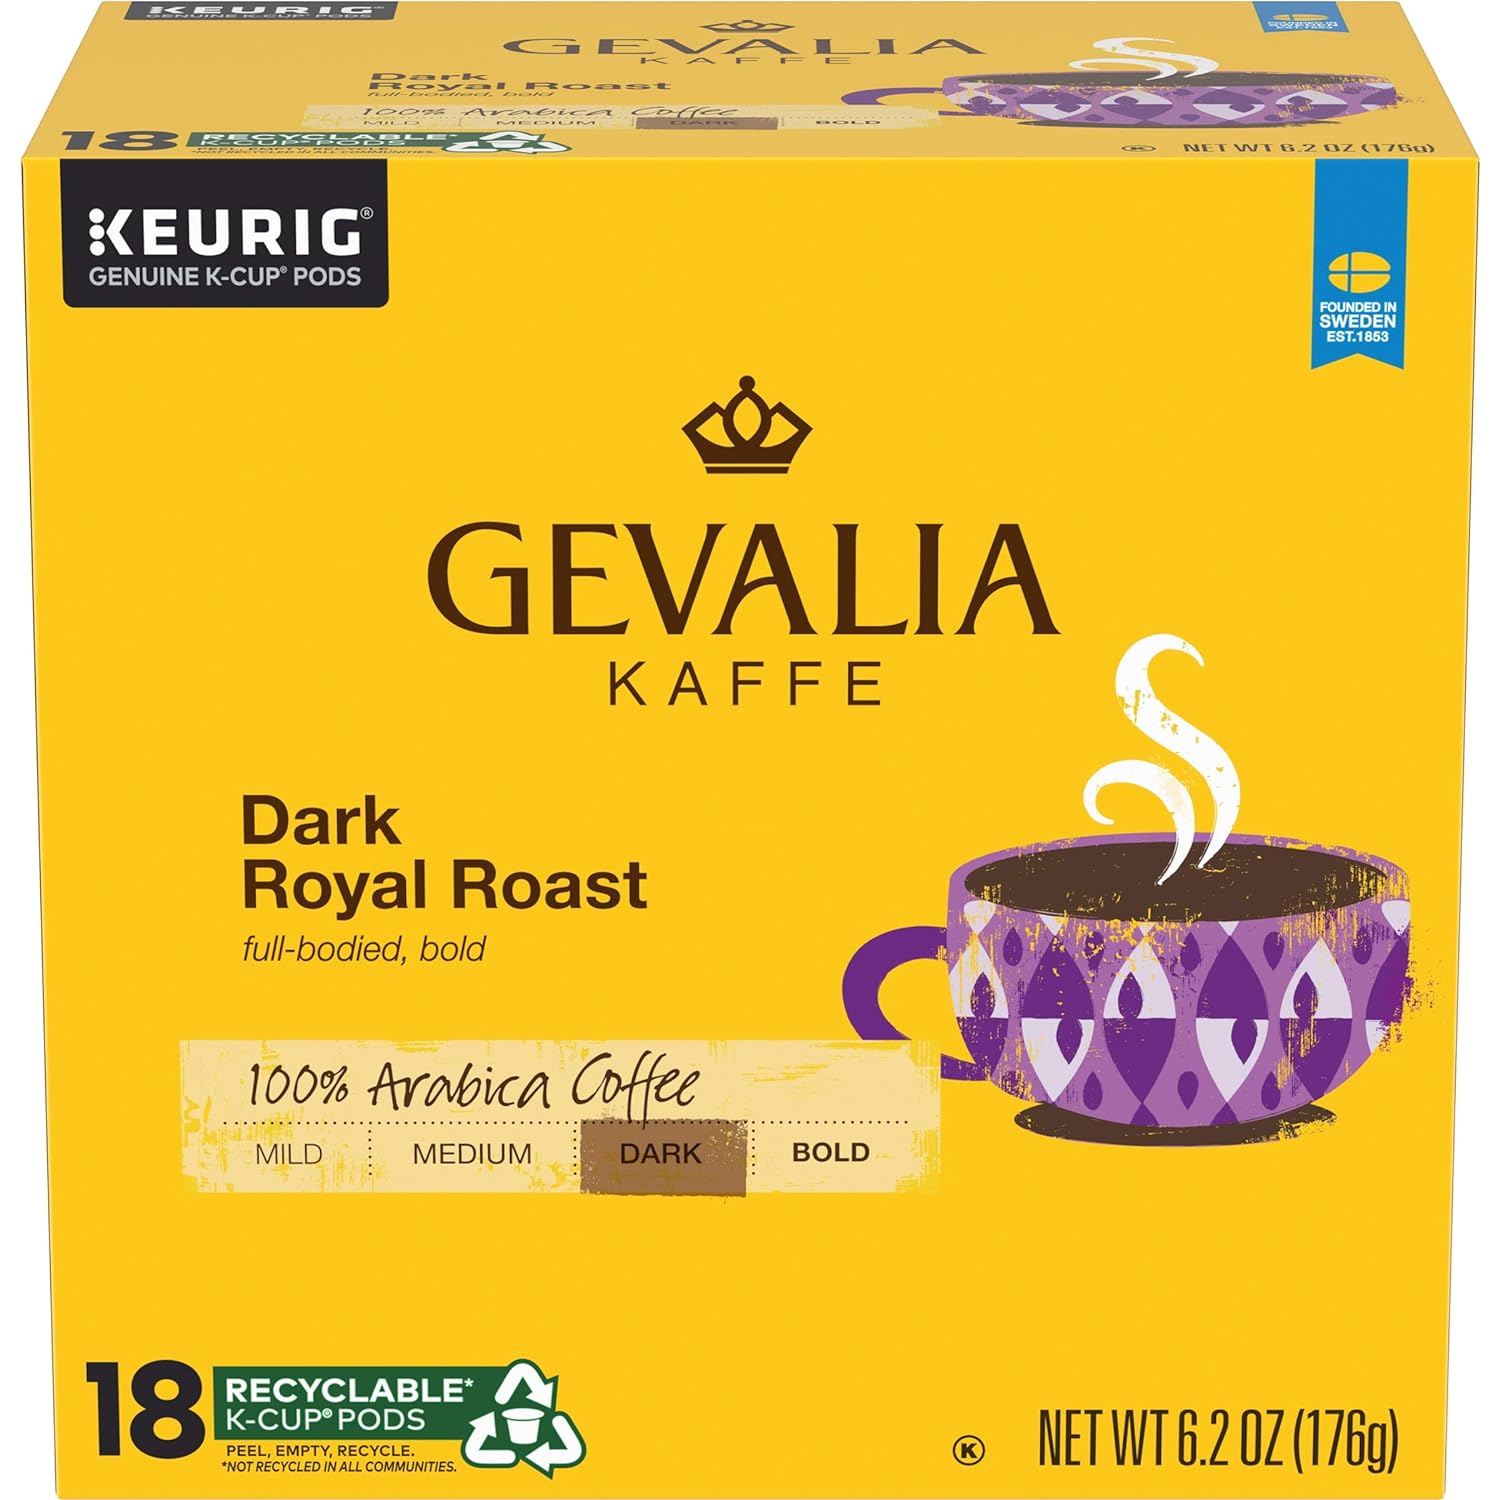 This coffee is very good. The dark roast is strong like I like it. Good price on a great coffee!